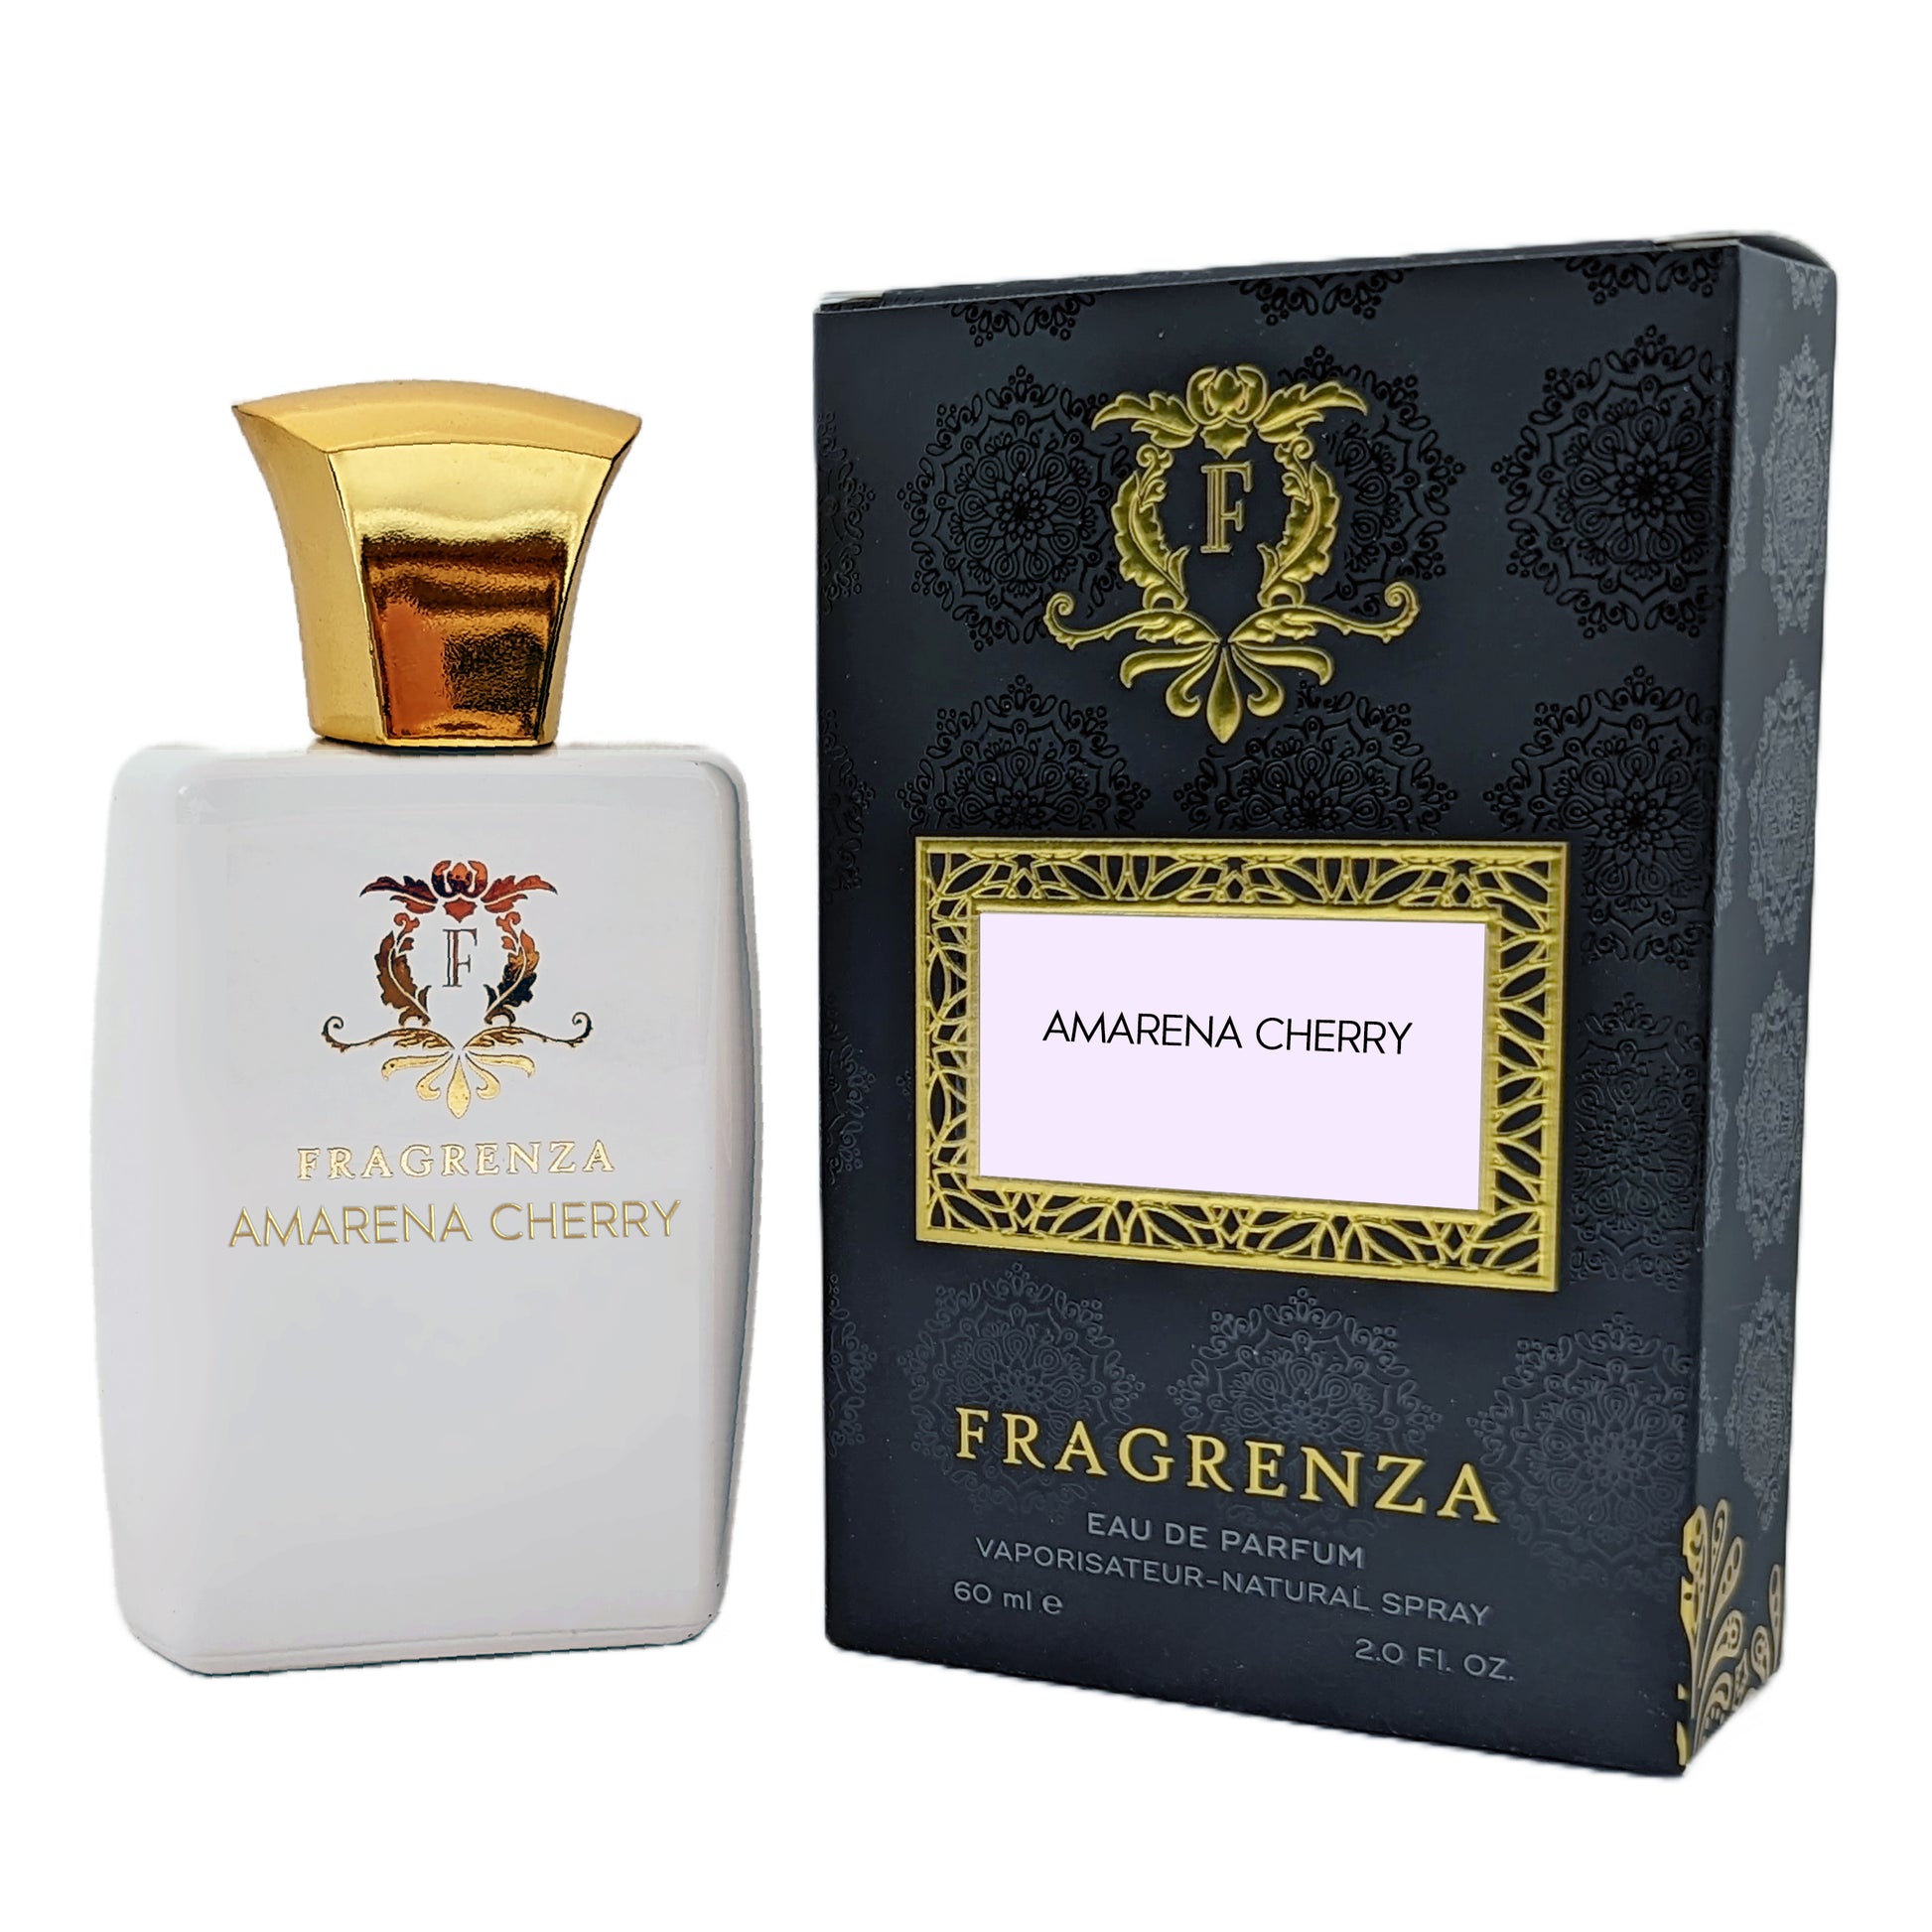 Tom Ford Lost Cherry Inspired Luxe Fragrance - Amarena Cherry – Fragrenza